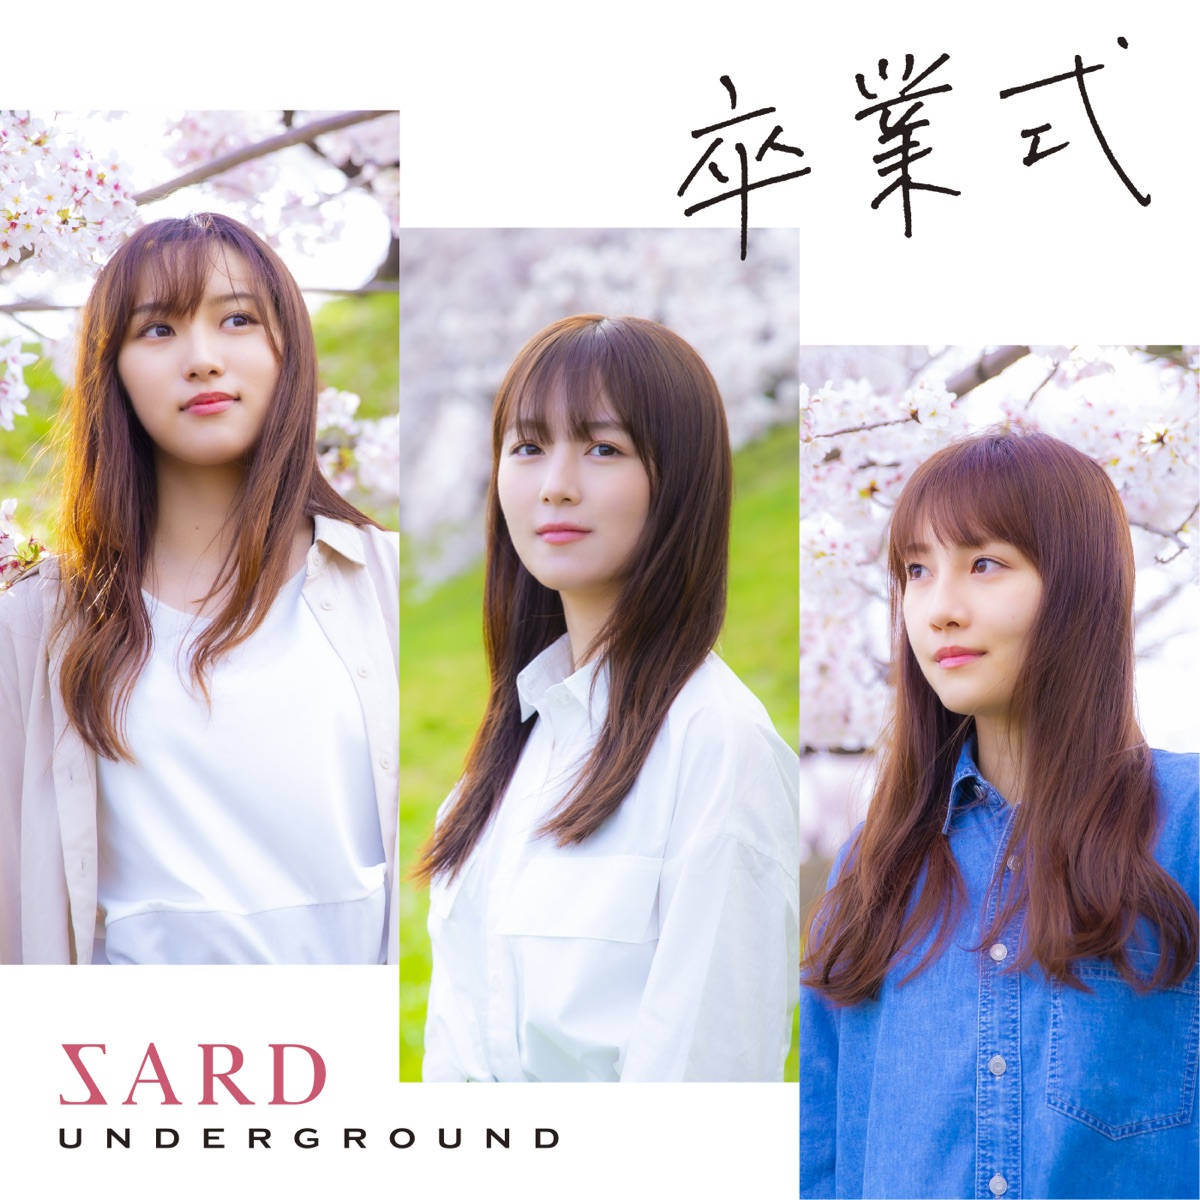 Cover art for『SARD UNDERGROUND - 卒業式』from the release『Sotsugyoushiki